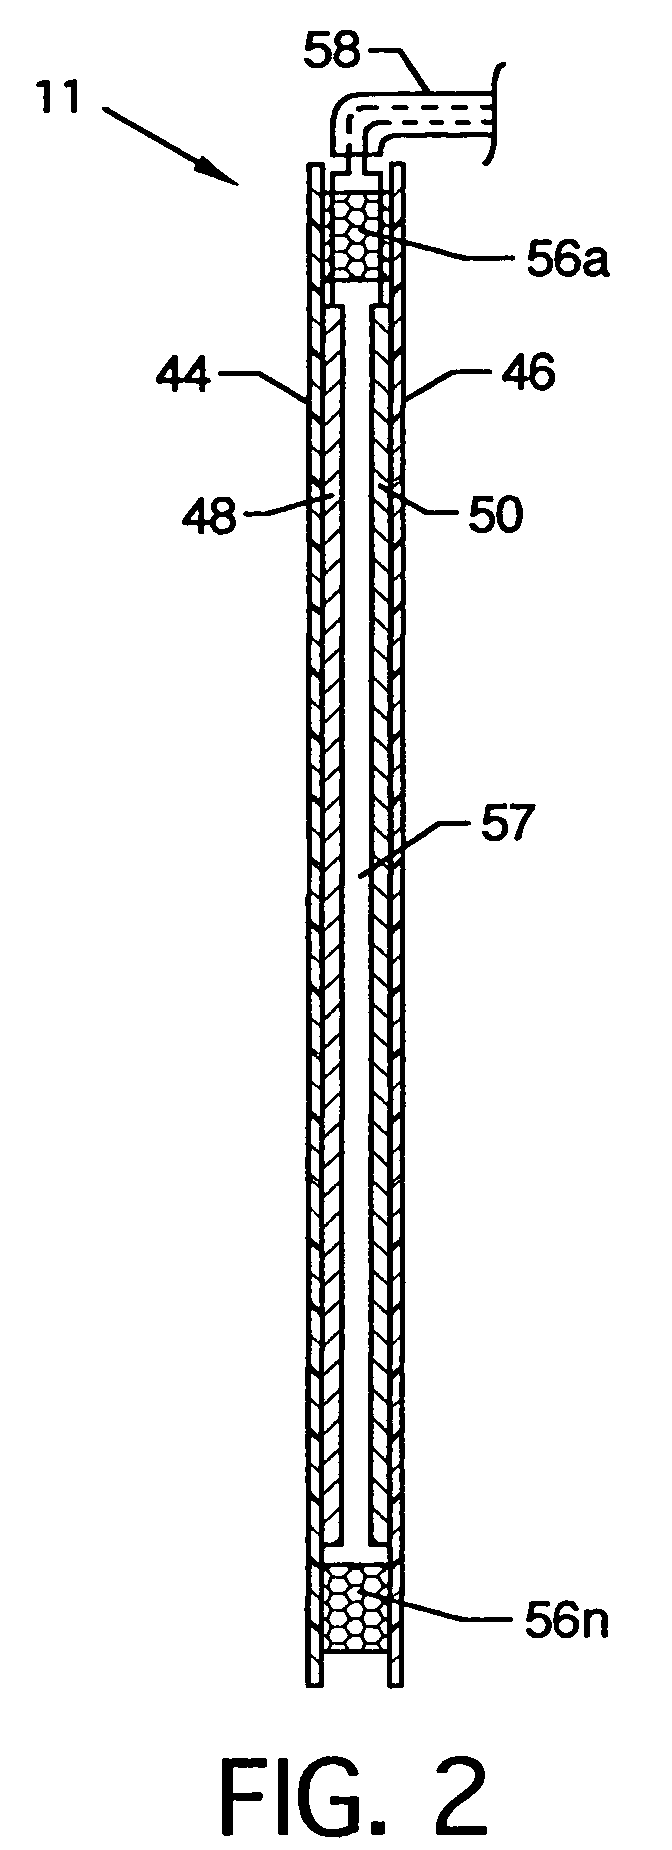 Method and apparatus for monitoring wet contact touchpads